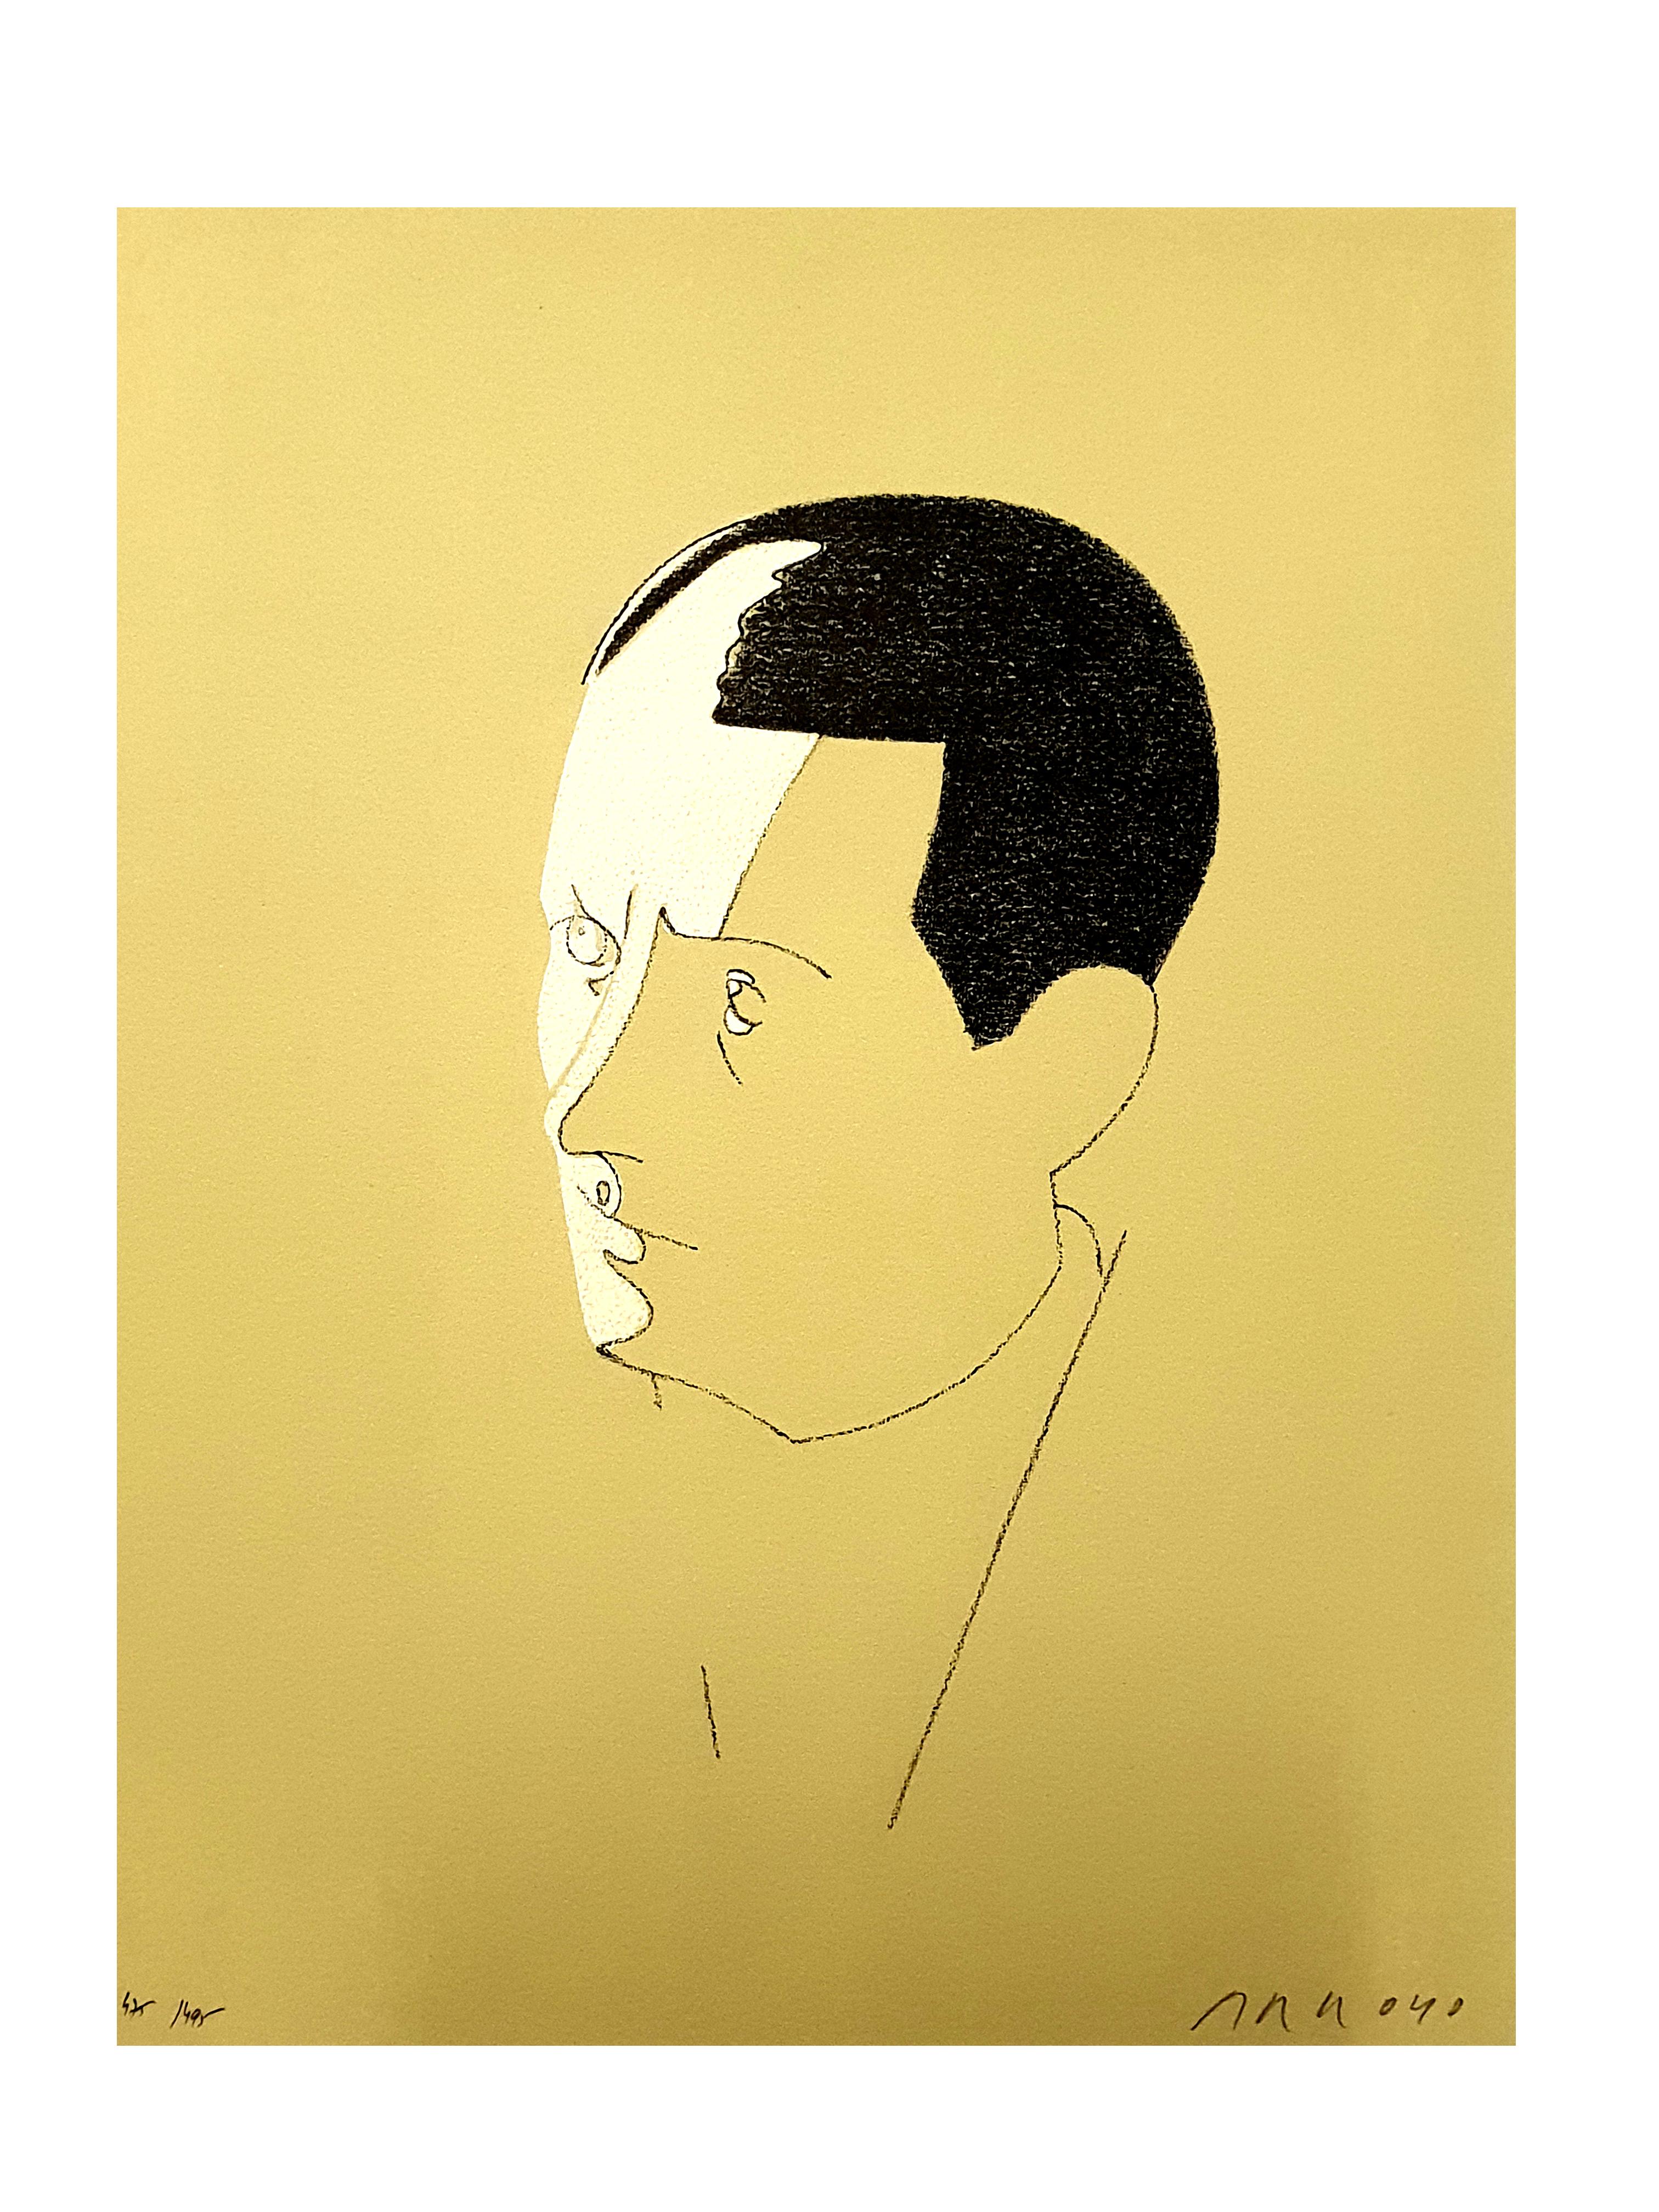 Eduardo Arroyo - Malraux - Original Lithograph
1984
Conditions: excellent
Edition: 495
Dimensions: 37.3 x 29 cm 
Handsigned and numbered
Editions:  Trinckvel

Eduardo Arroyo is born in 1937 in Madrid where he studies at the French high school, at